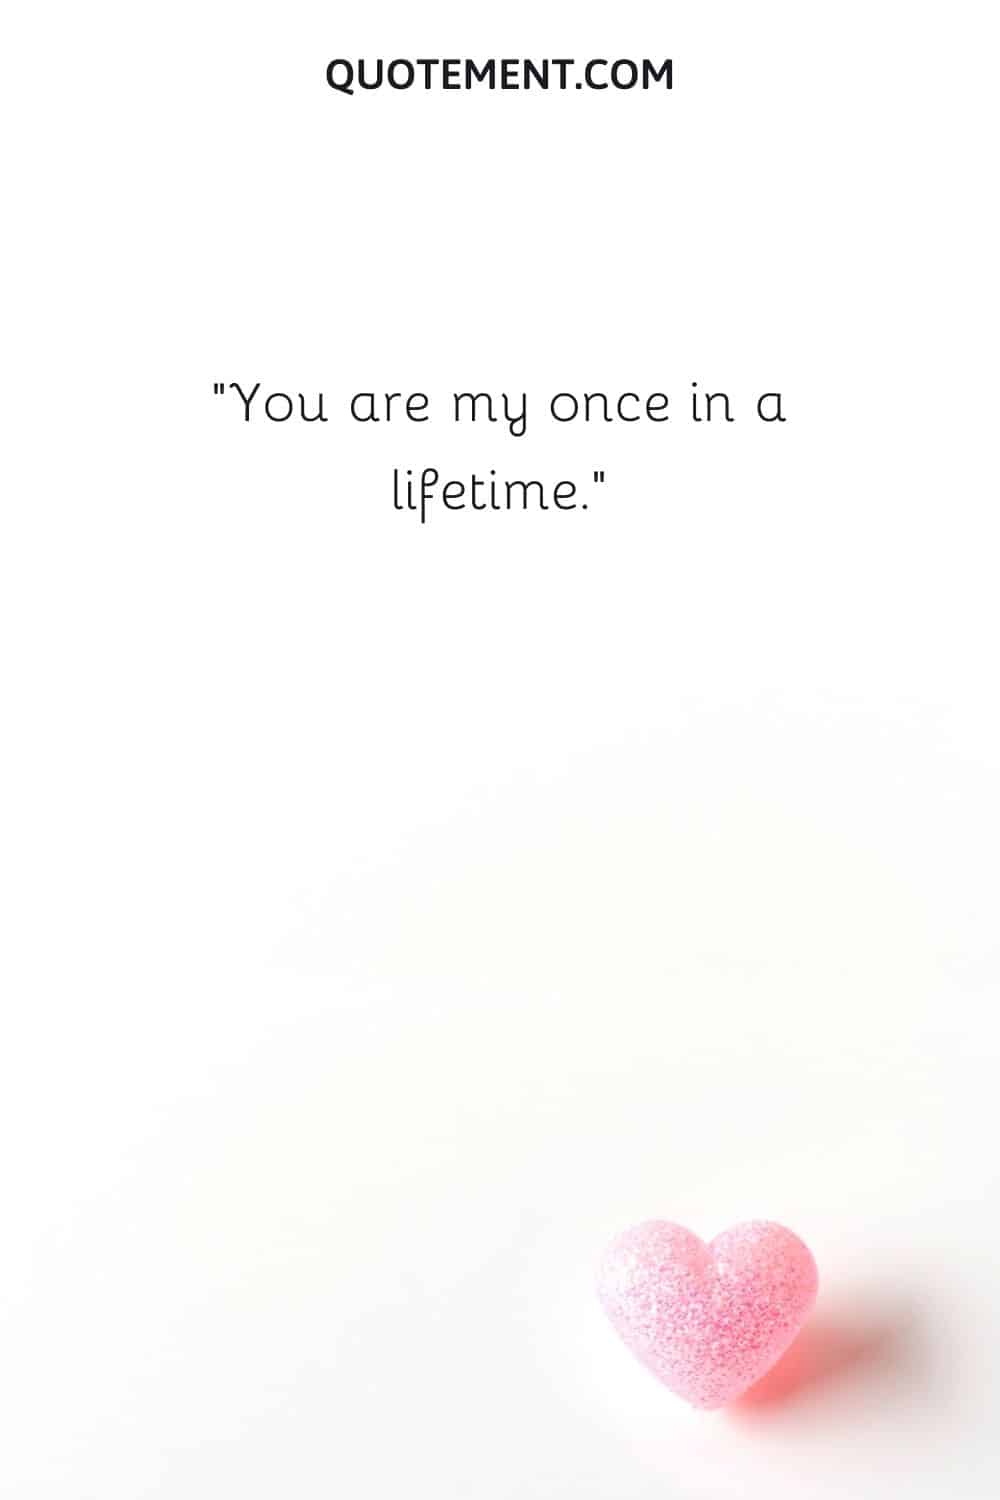 You are my once in a lifetime.